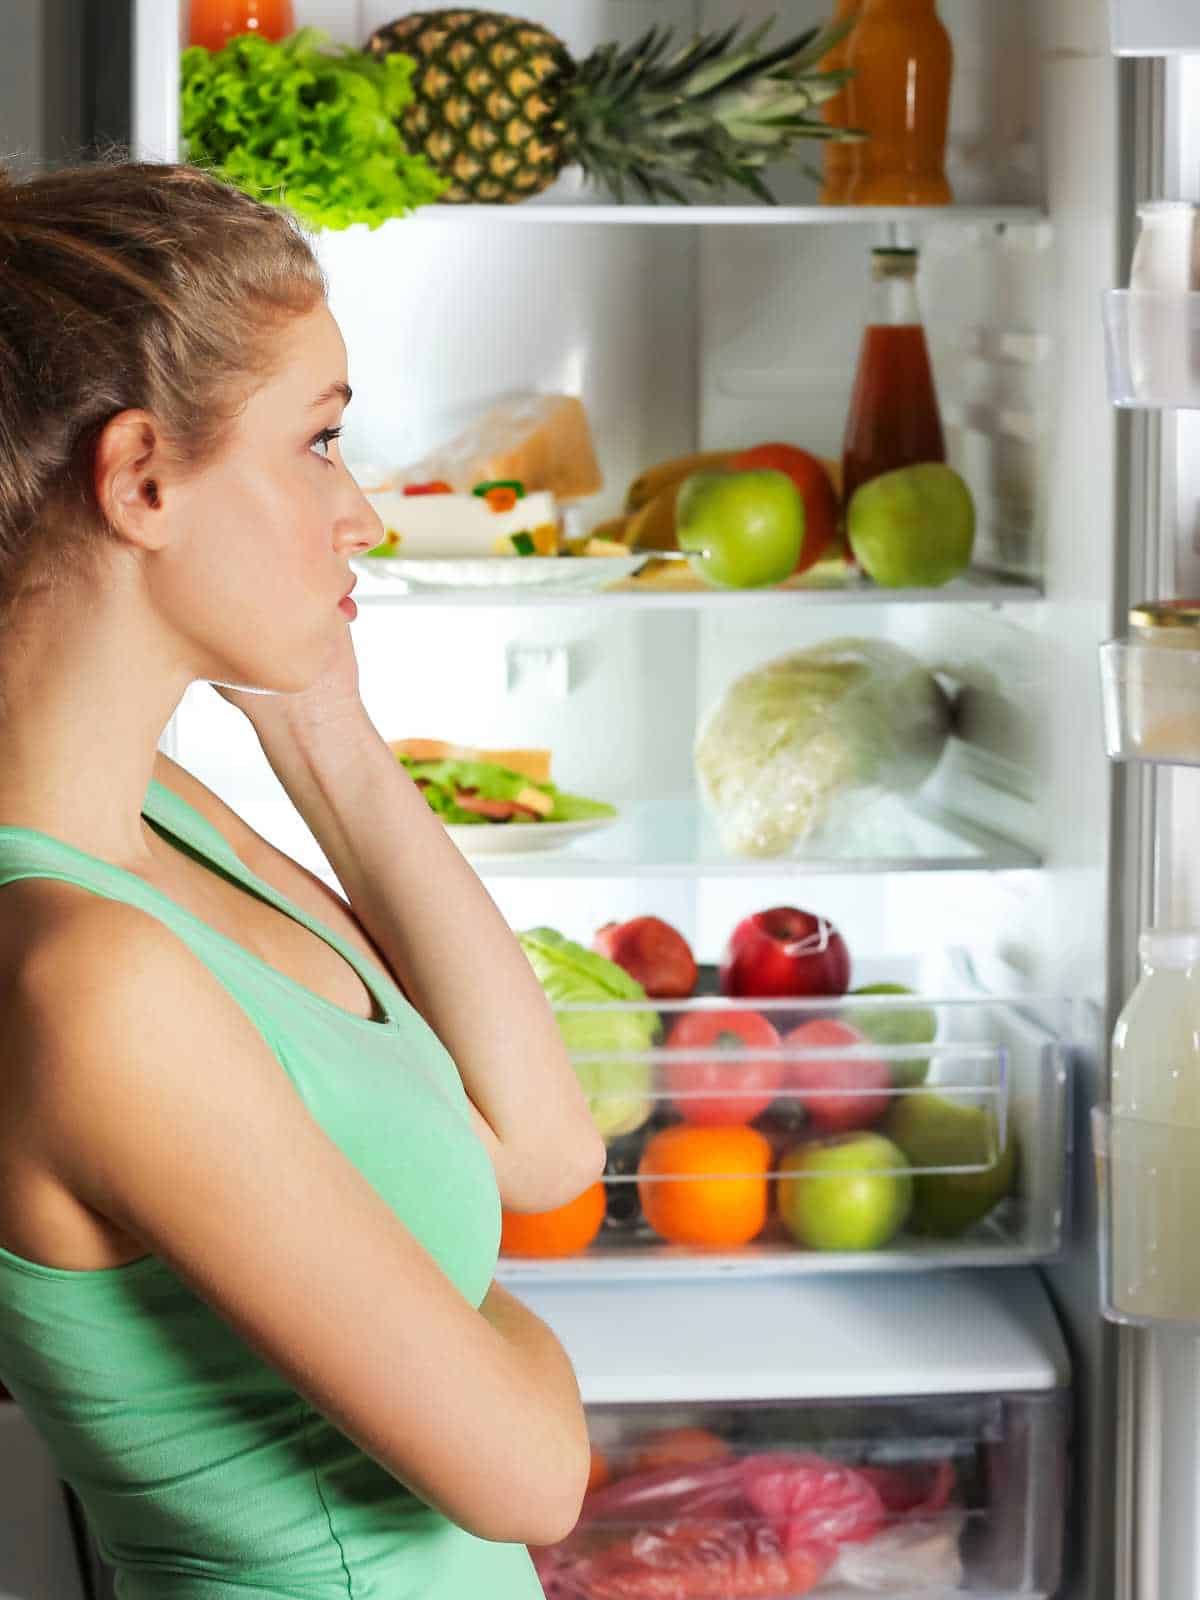 A mom looking into fridge to plan a meal.